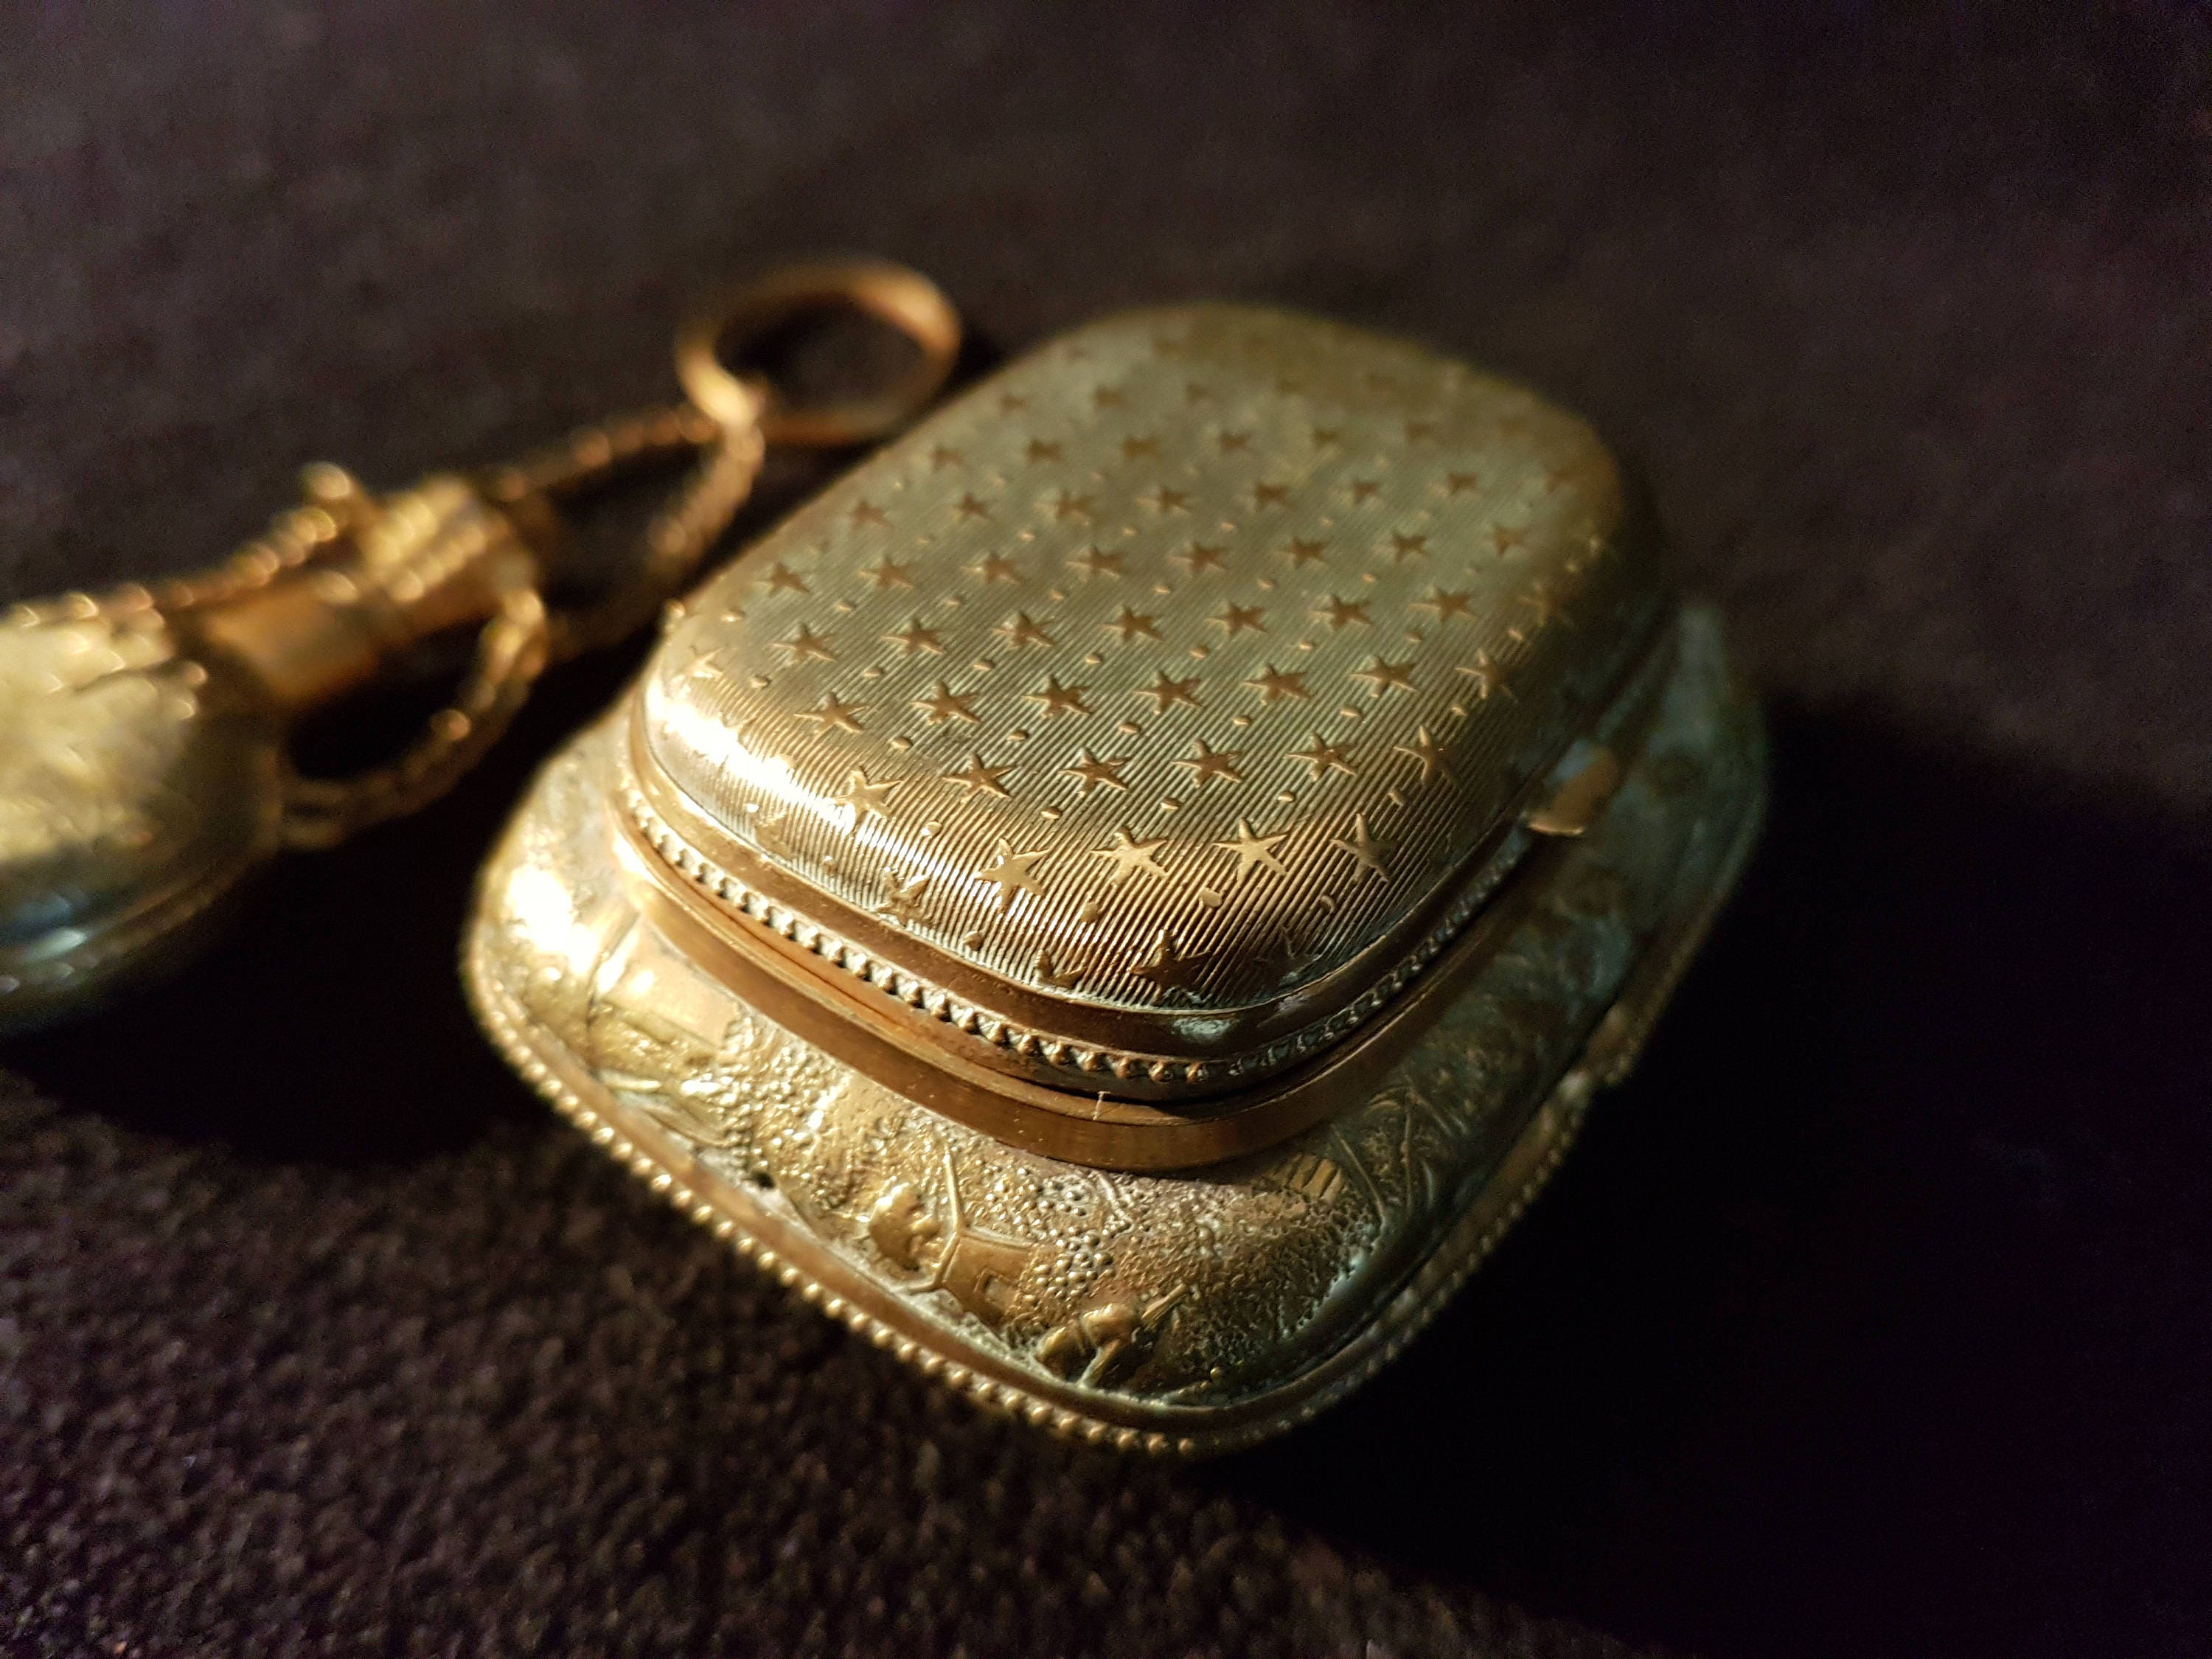 Lot of TWO Antique 19th Century French Gold Gilded Snuff Box - Etsy